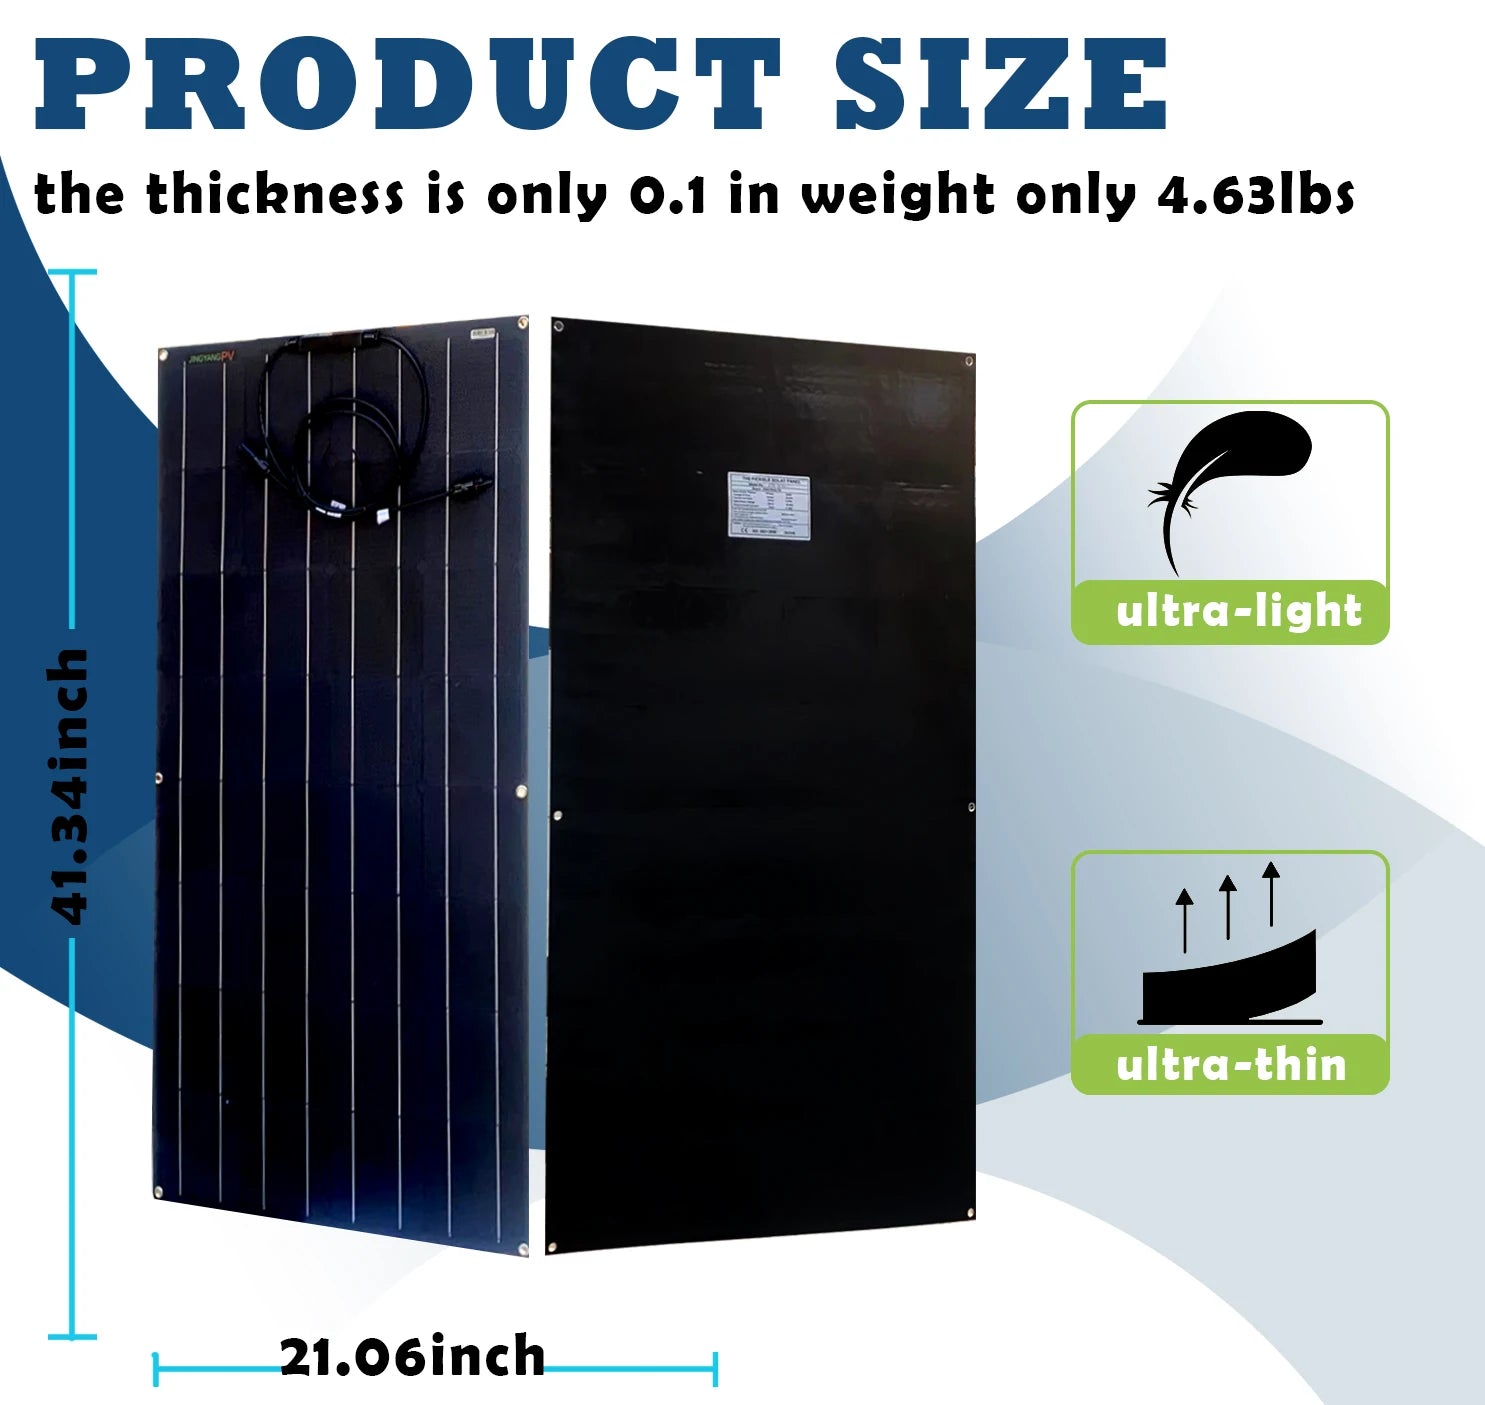 Jingyang Solar Panel, Compact and lightweight product with dimensions: 0.1in thick, 21.06in long, weighing 4.63lbs.